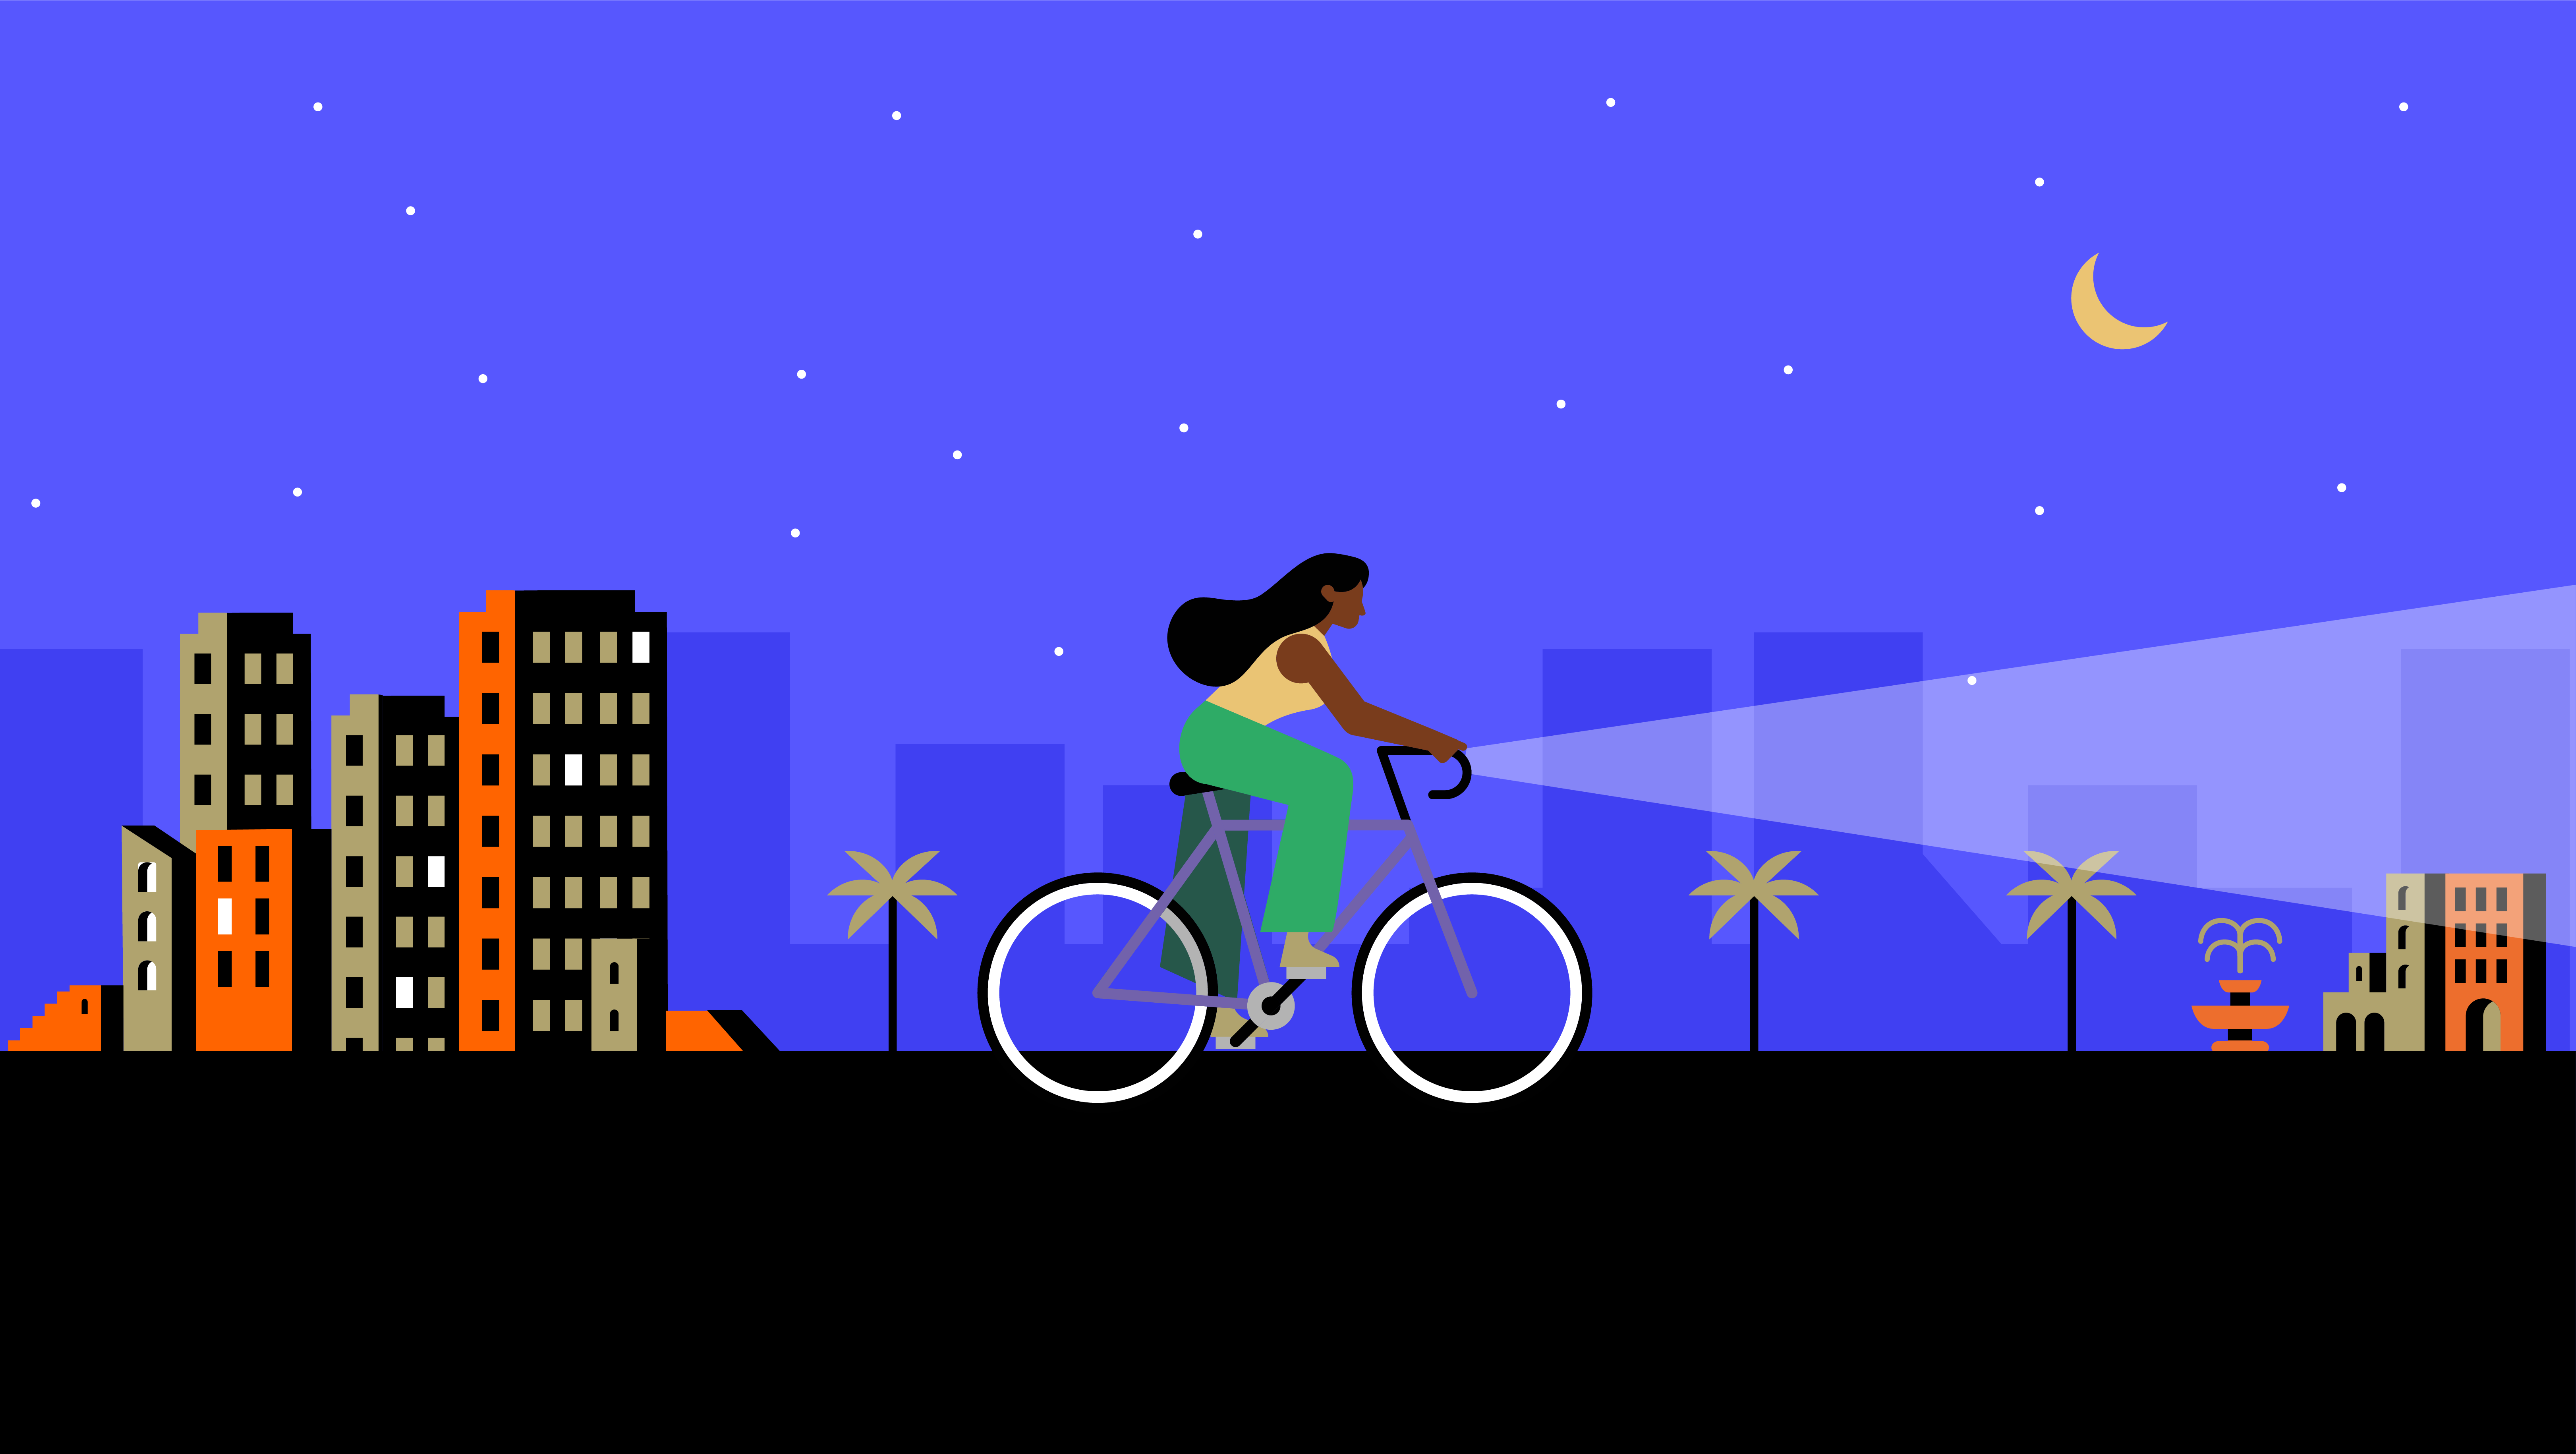 Minimalist illustration of a woman riding a bike at night in an urban area